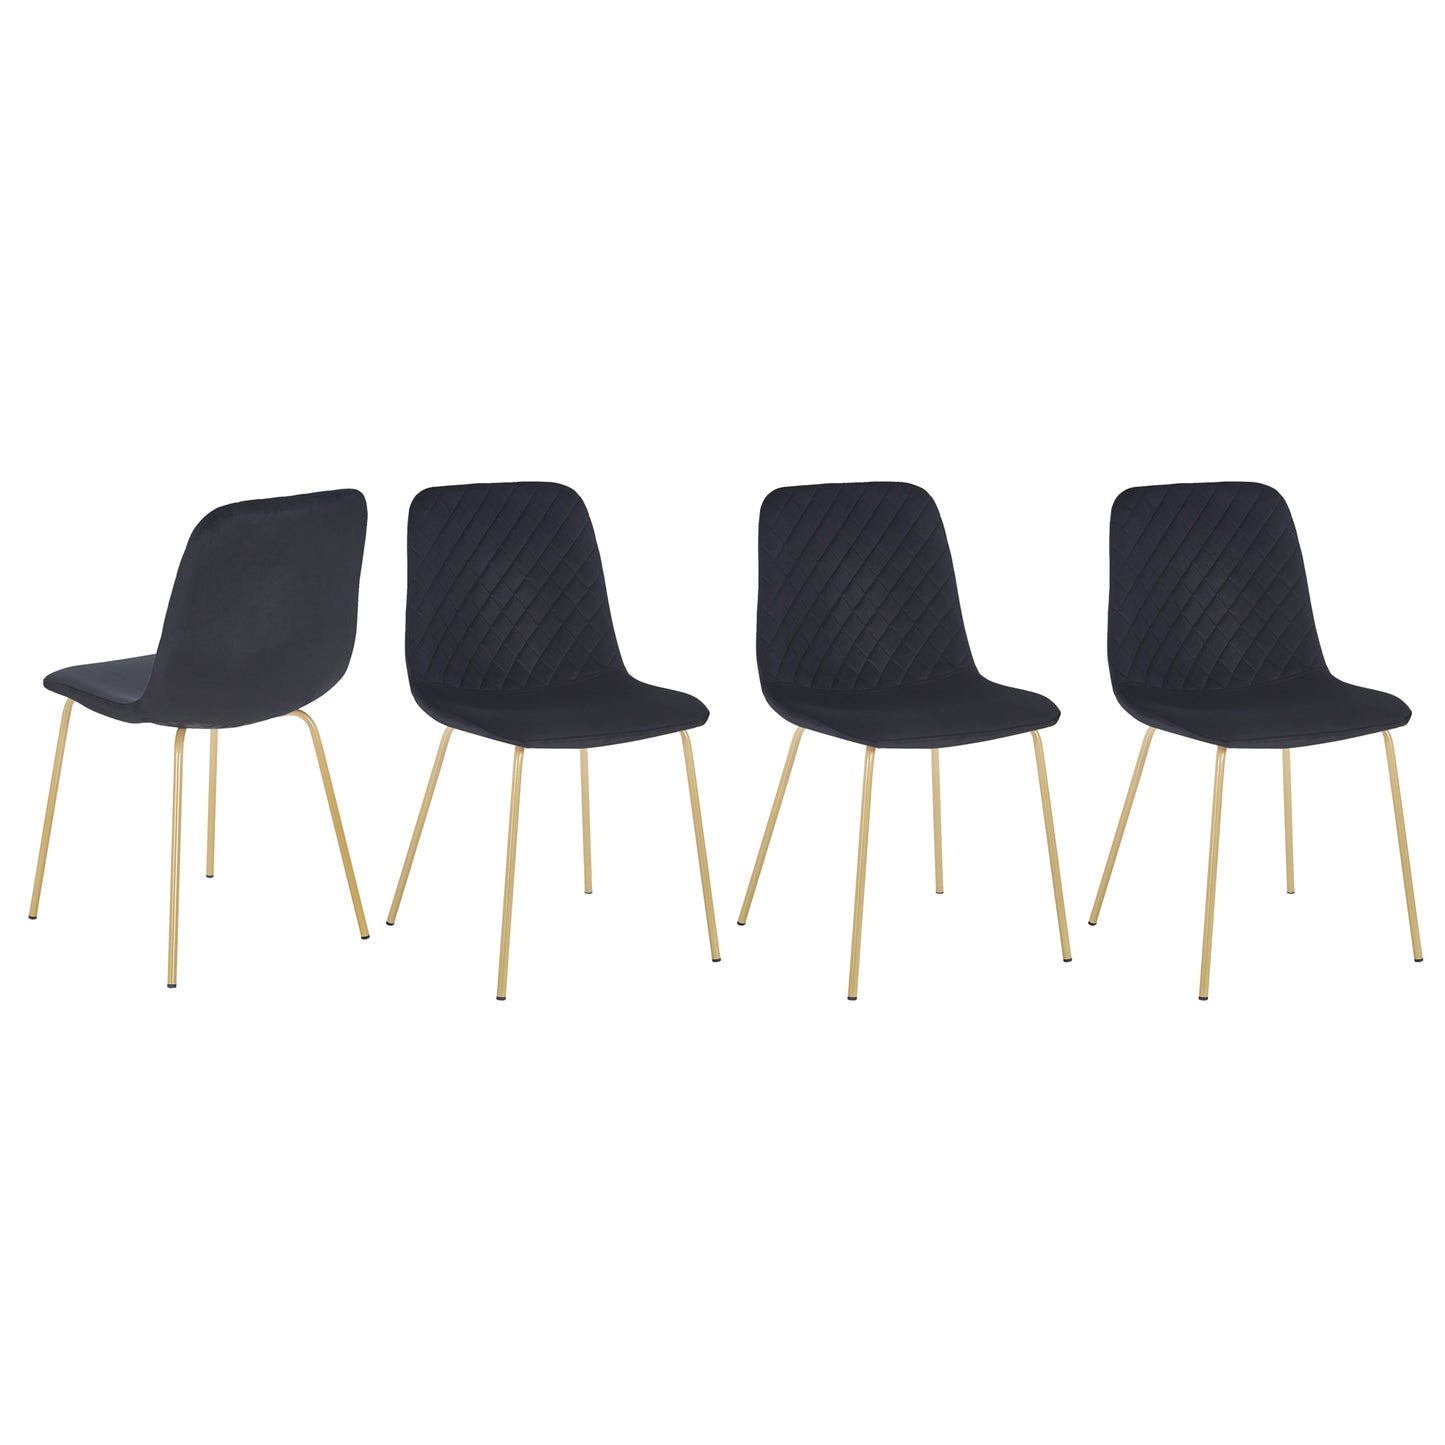 Dining chair set of 4 PCS (BLACK), Modern style, New technology, Suitable for restaurants, cafes, taverns, offices, living rooms, reception rooms.Simple structure, easy installation.